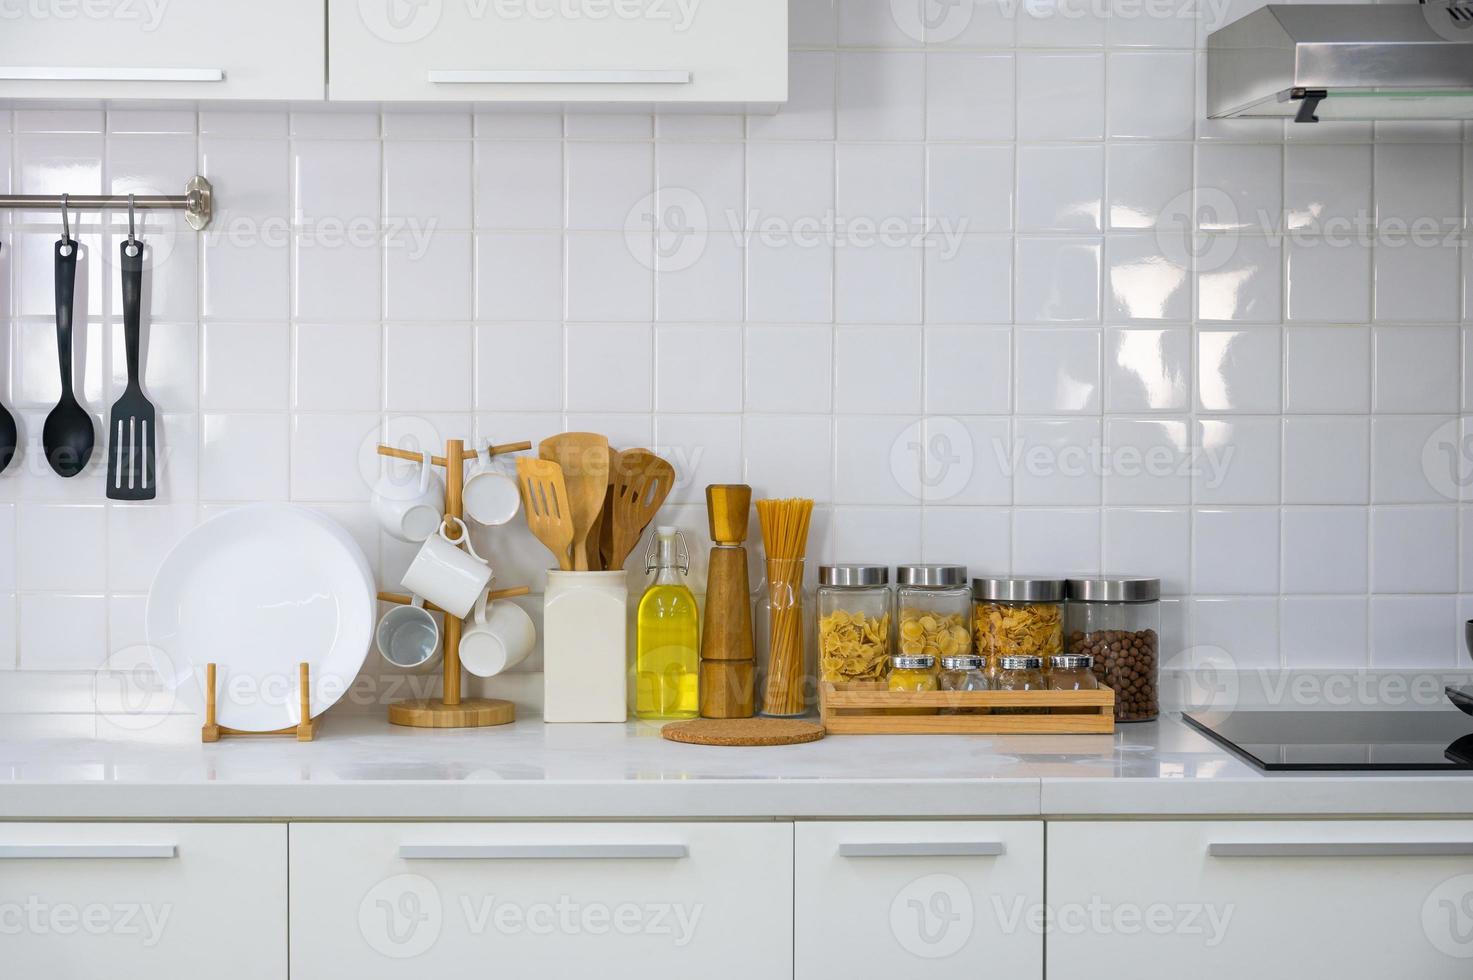 Kitchen utensils and kitchenware on white countertop at home photo